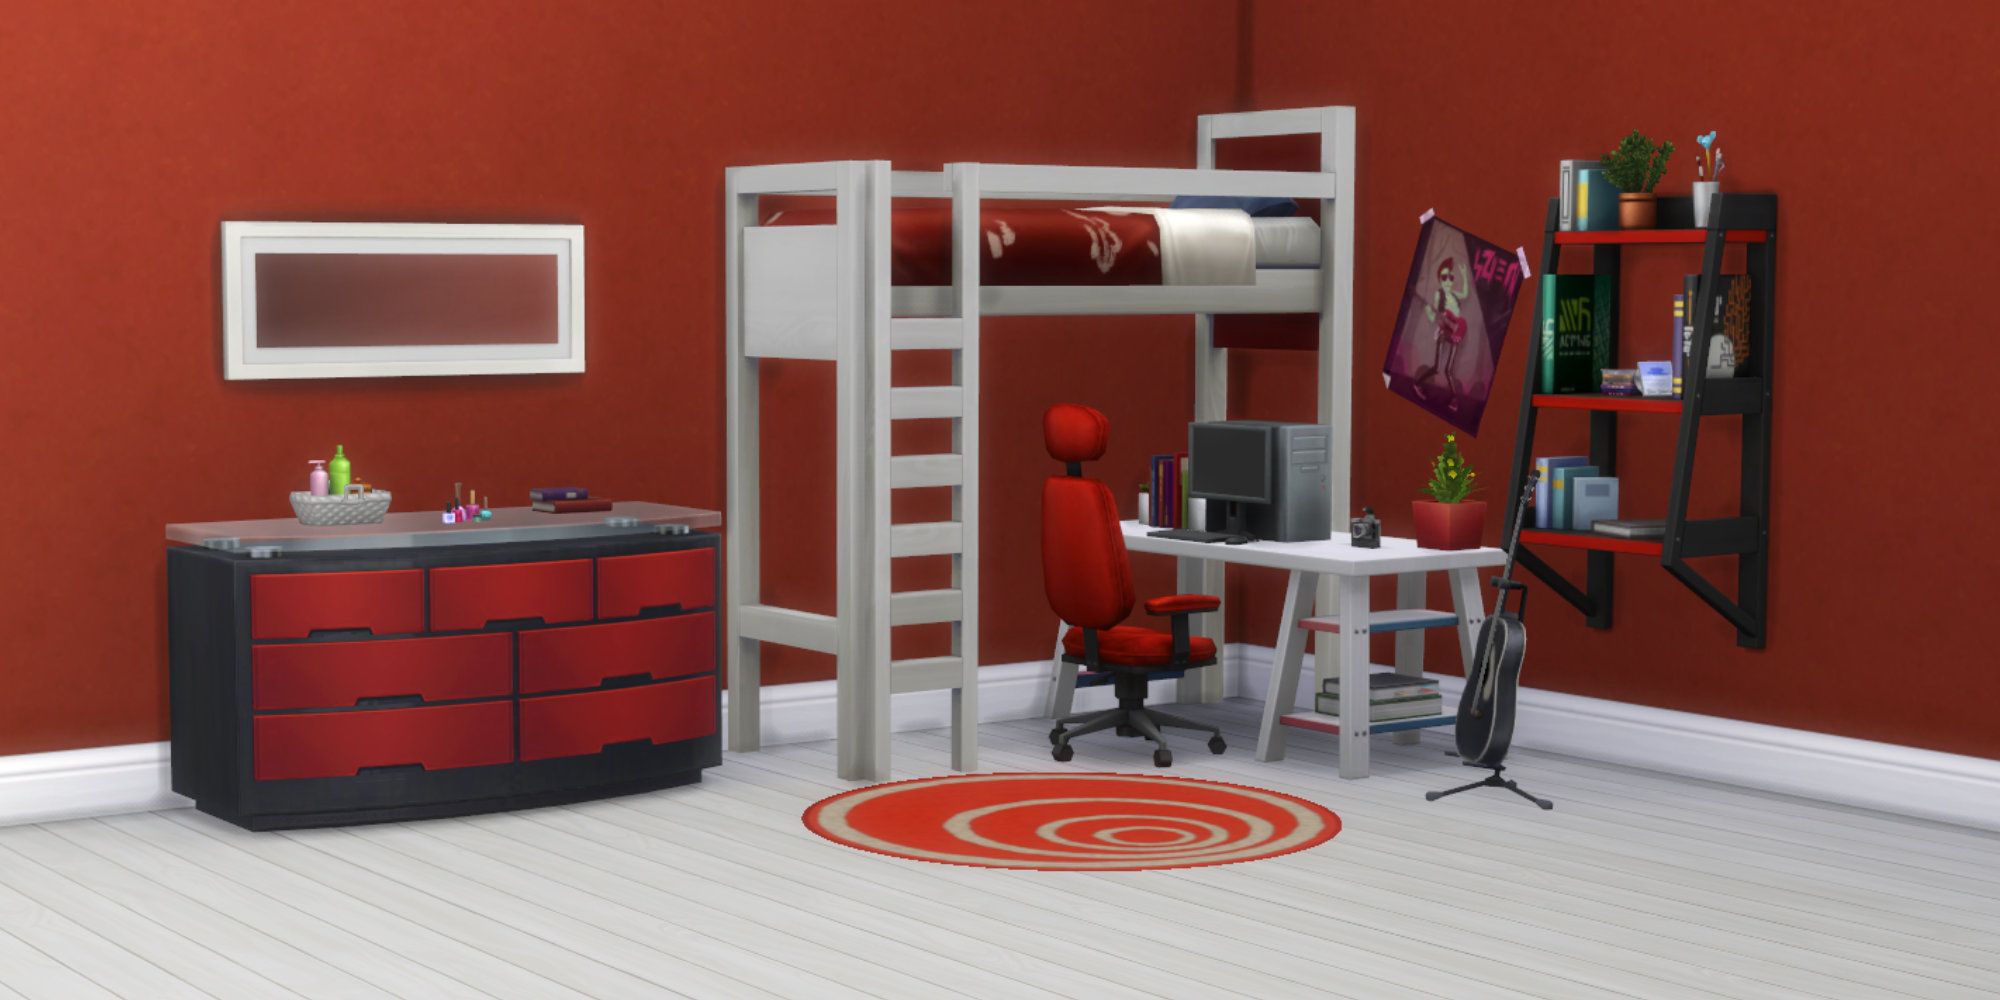 Sims 4 bunk bed with furniture for a teenagers room